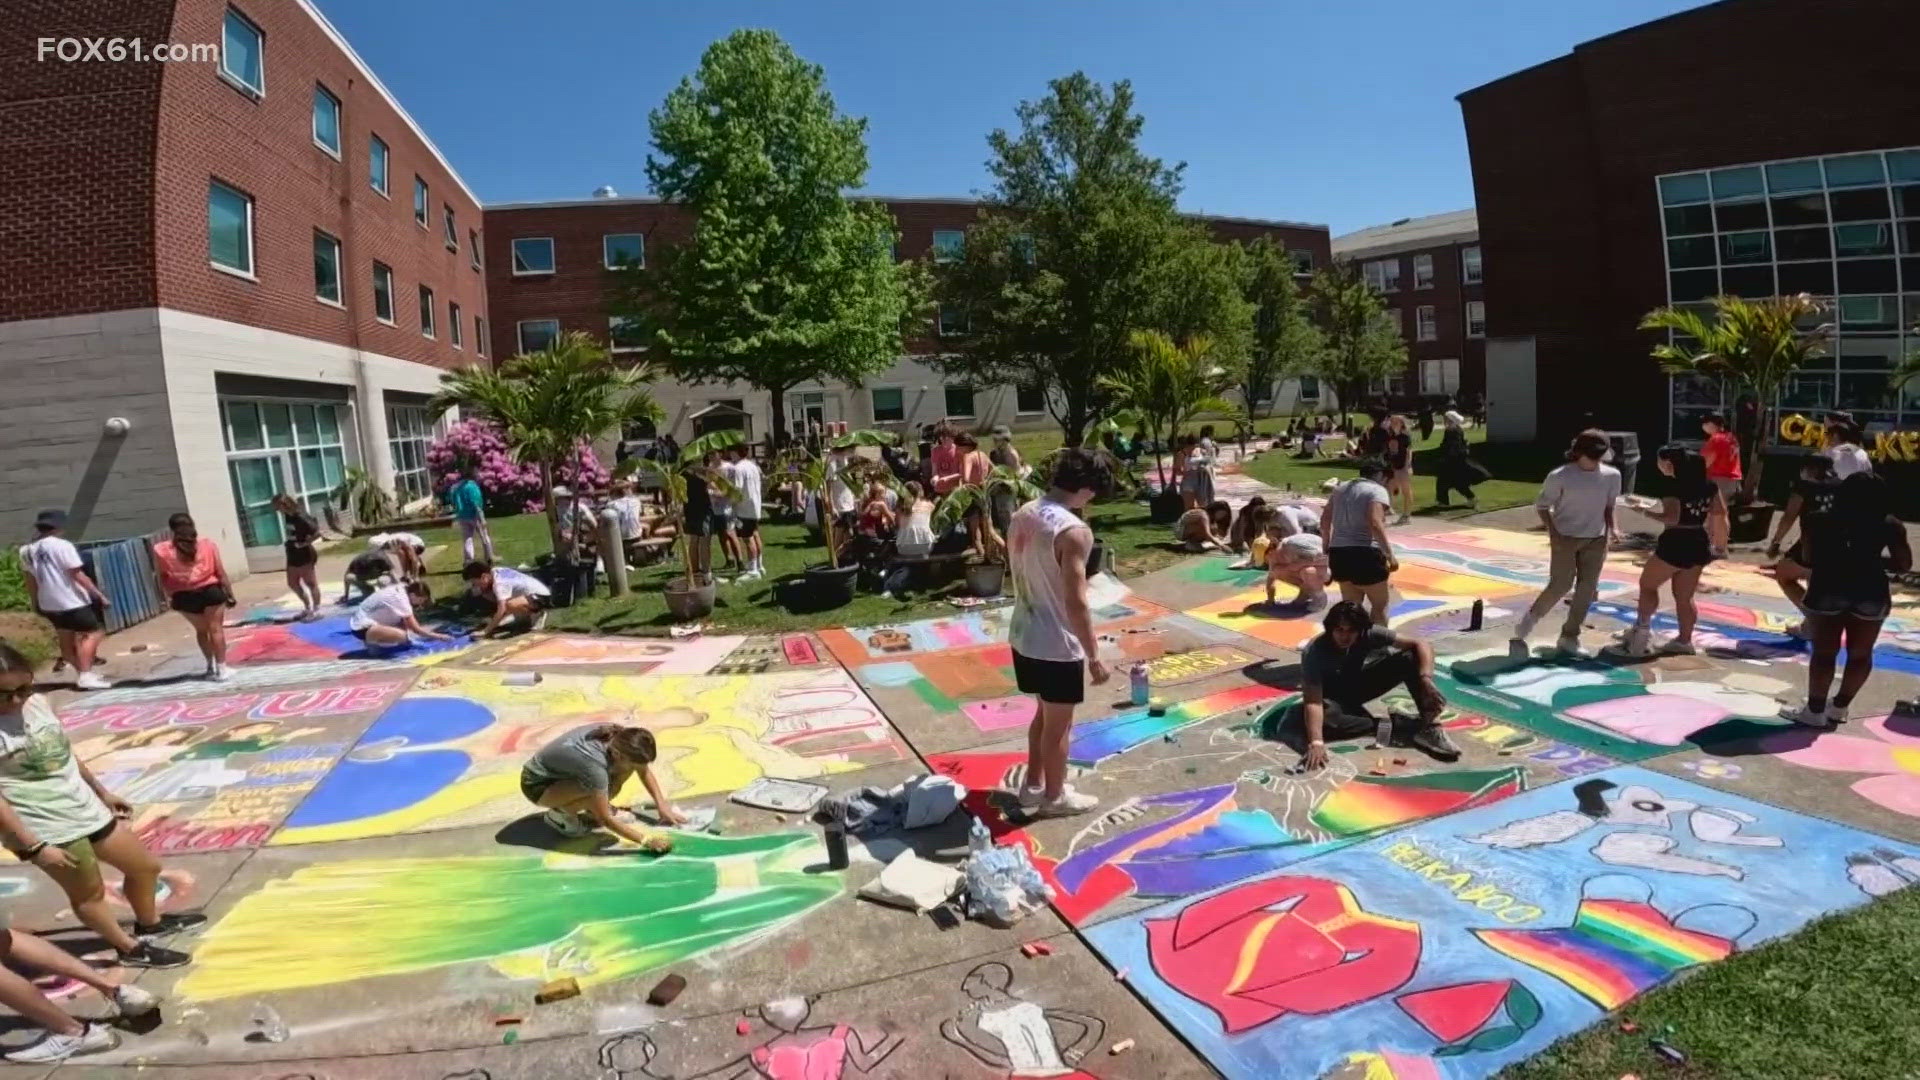 An art tradition continues at a high school in Hamden, as students head outside to create artwork with chalk.